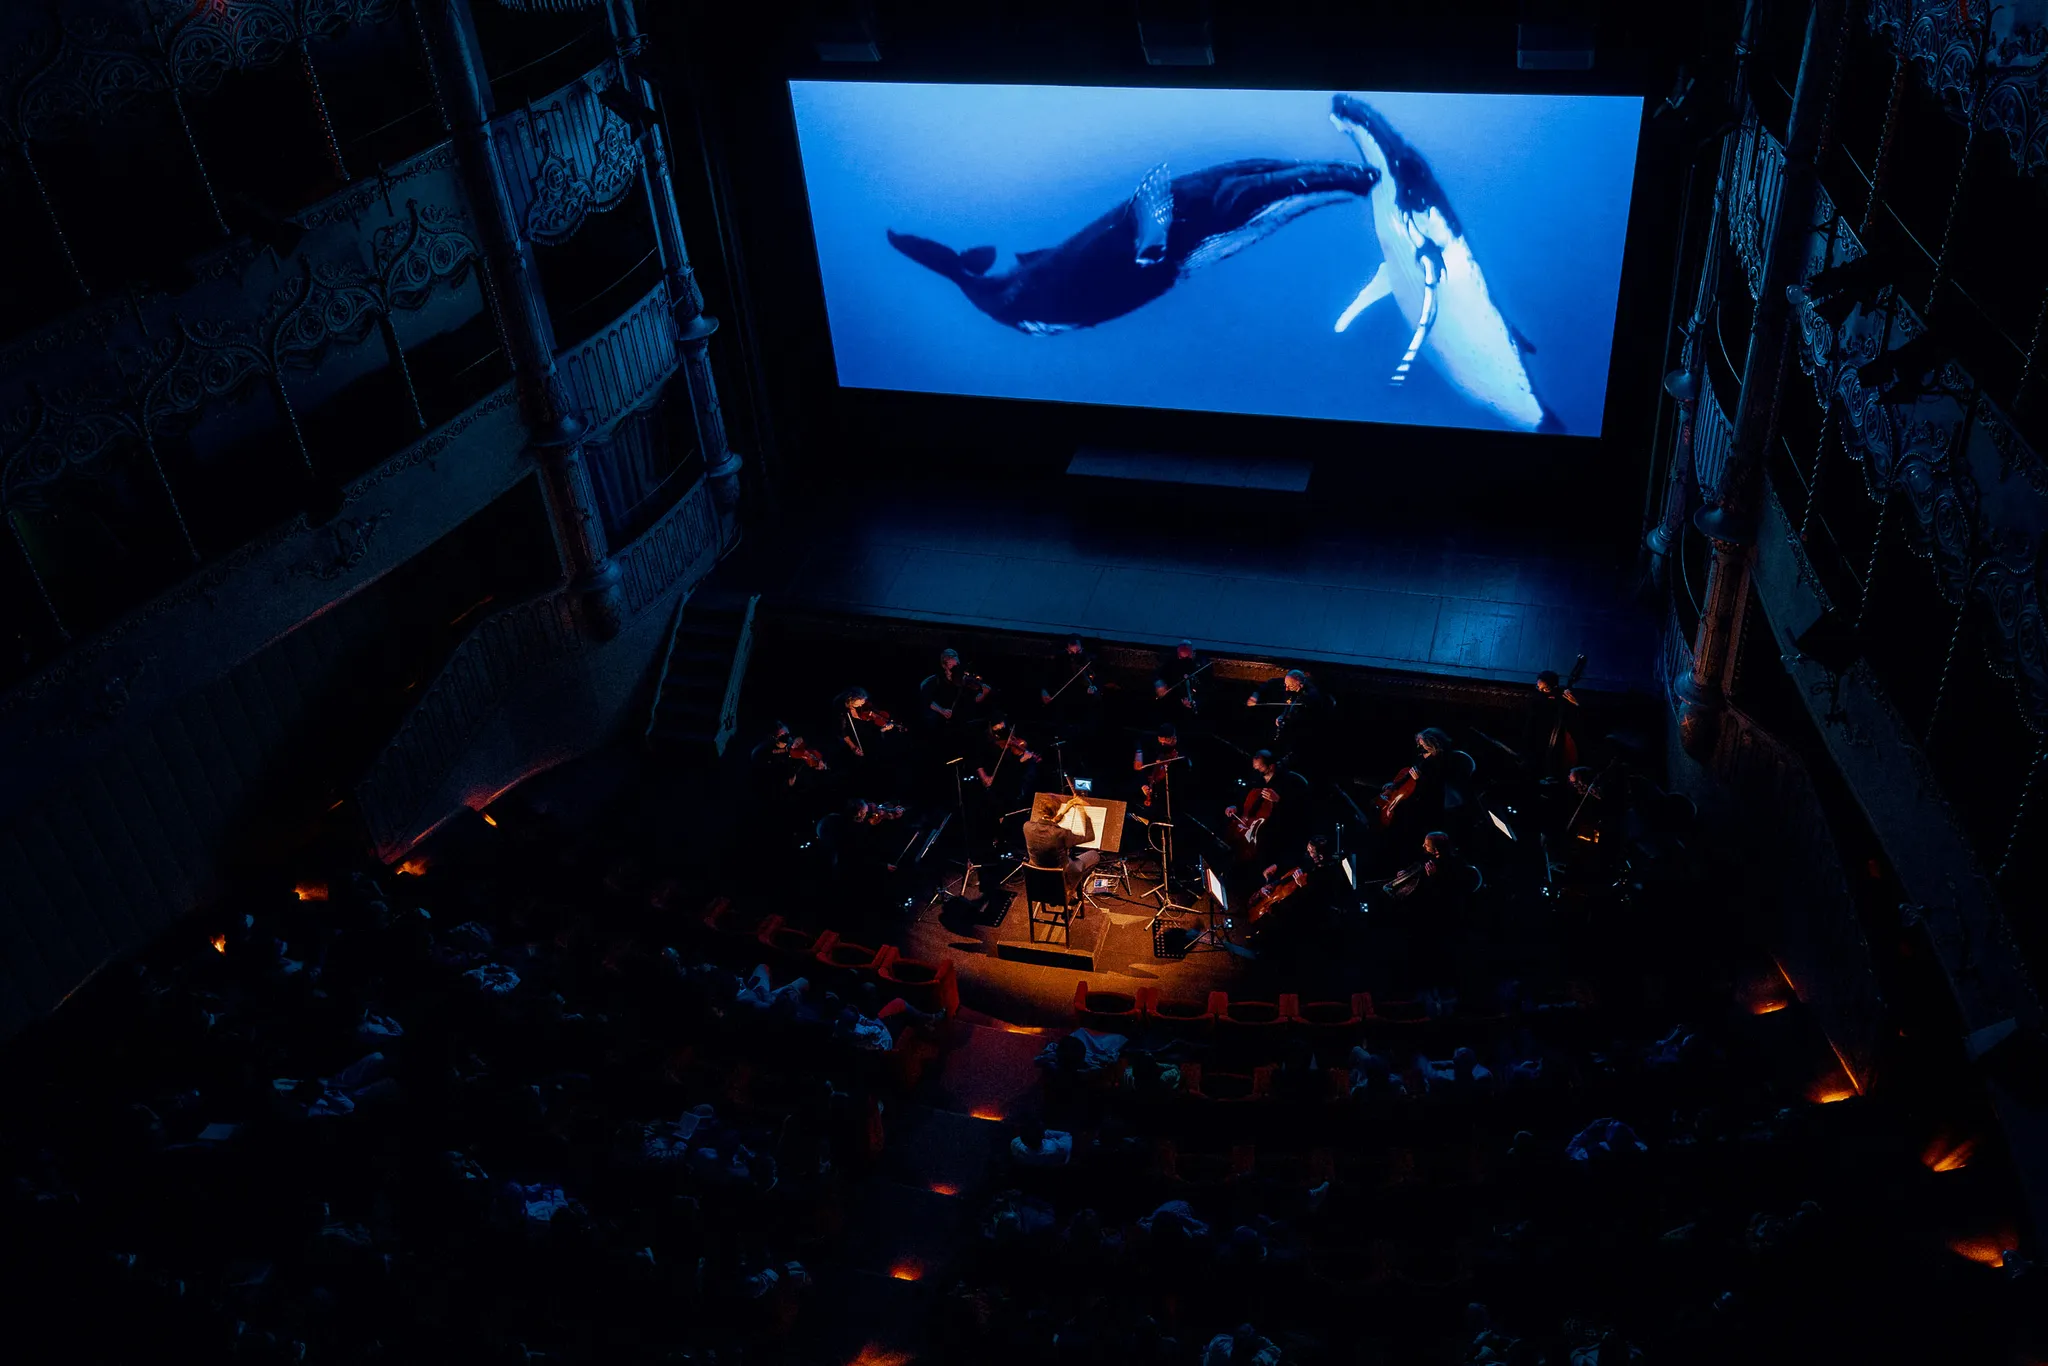 Projection on a screen of two large whales in blue water with live orchestra in a theatre